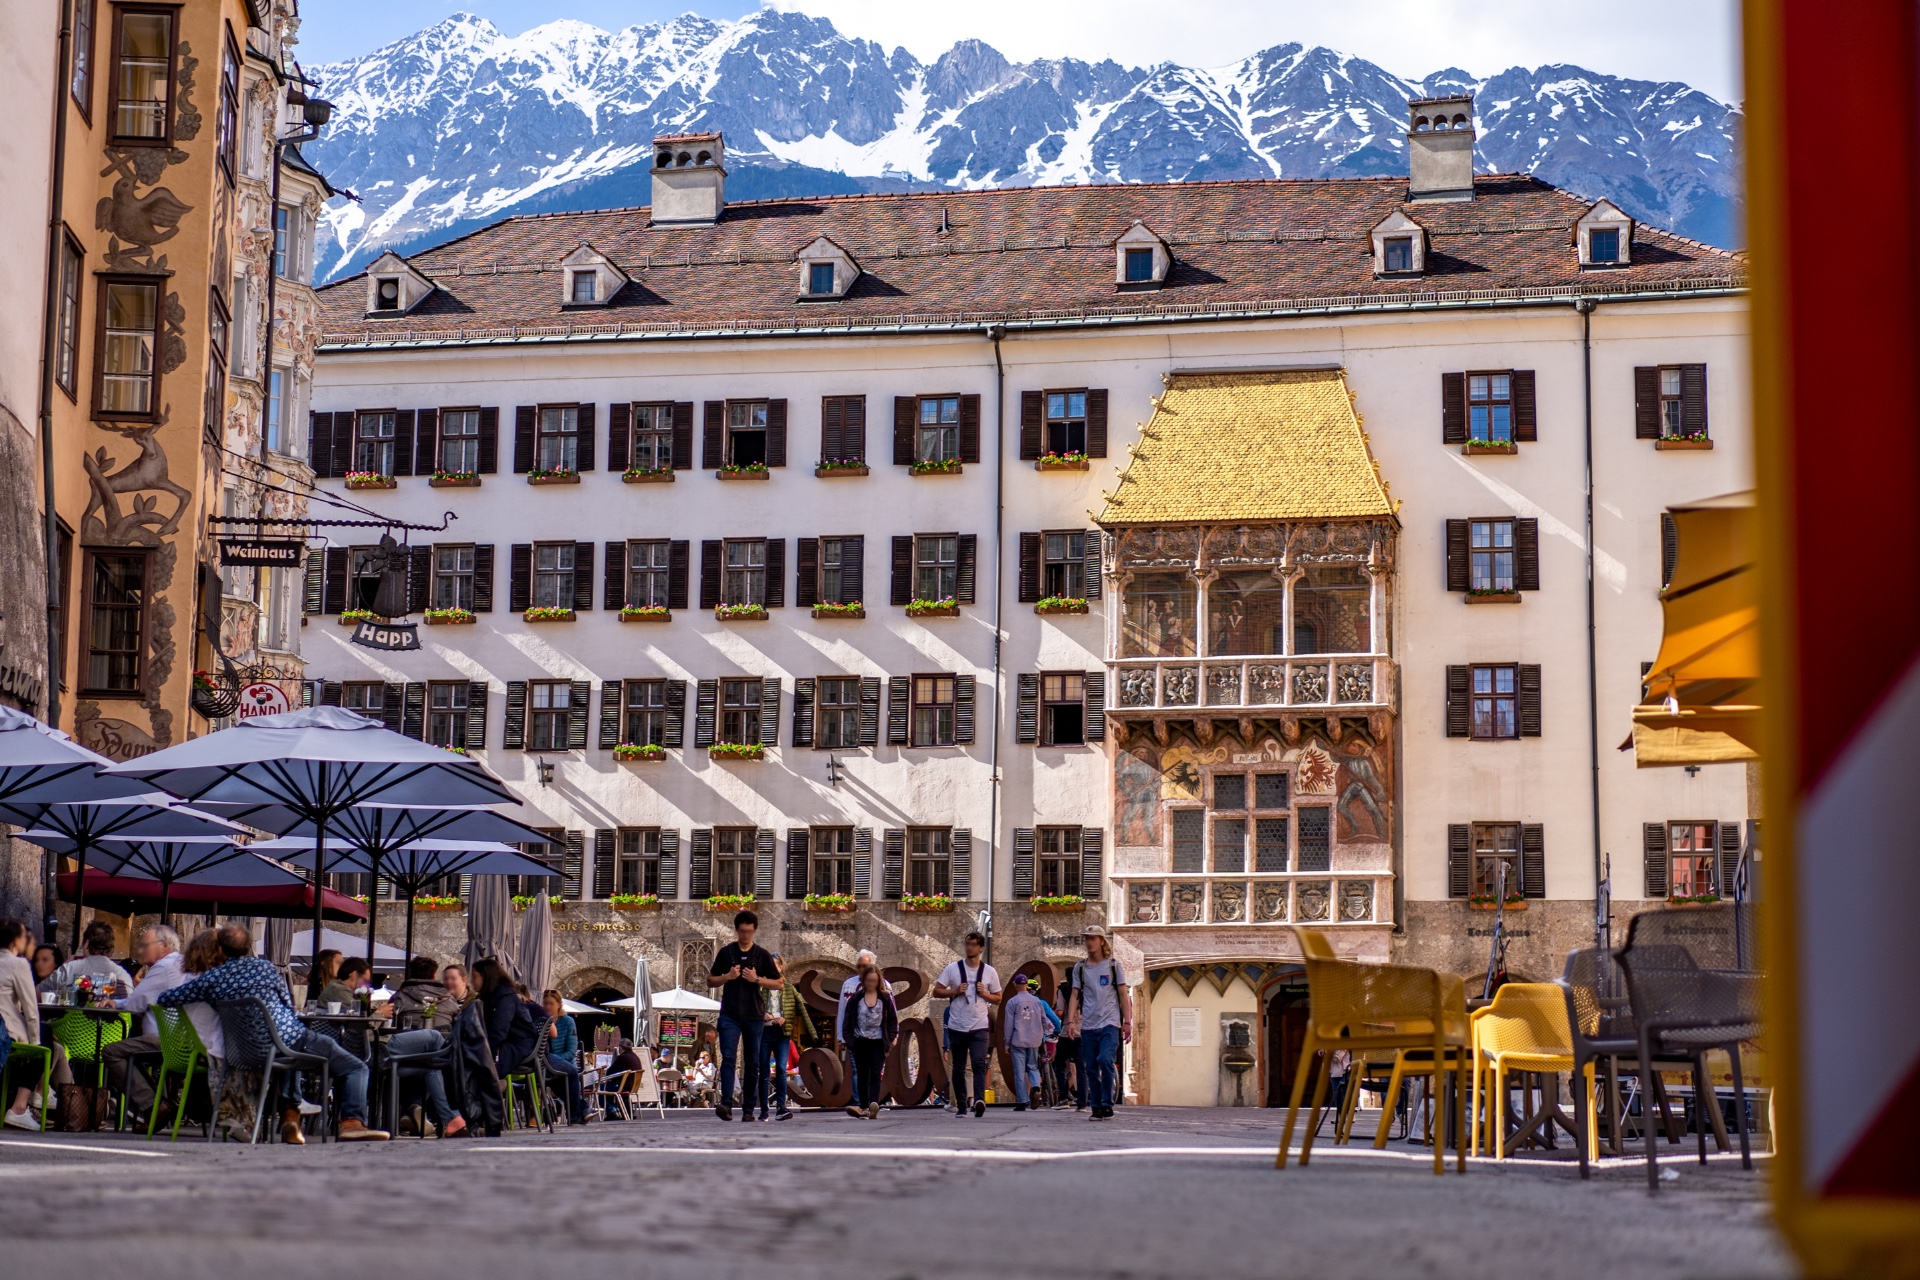 Innsbruck to Salzburg: Through the Alps Along River Cycle Trails